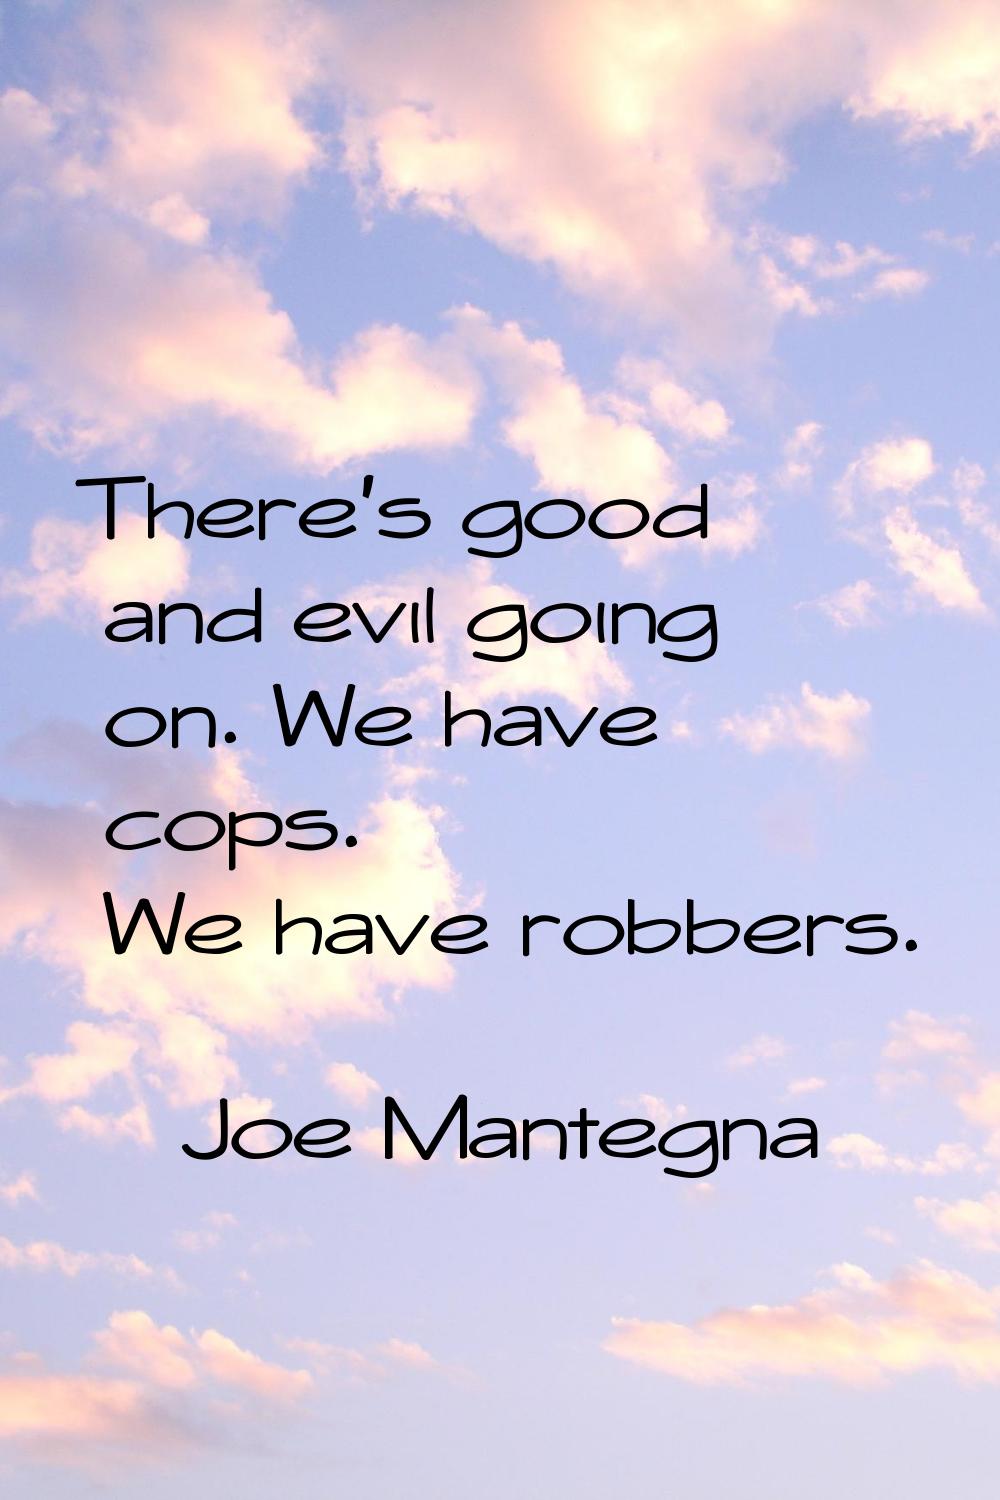 There's good and evil going on. We have cops. We have robbers.